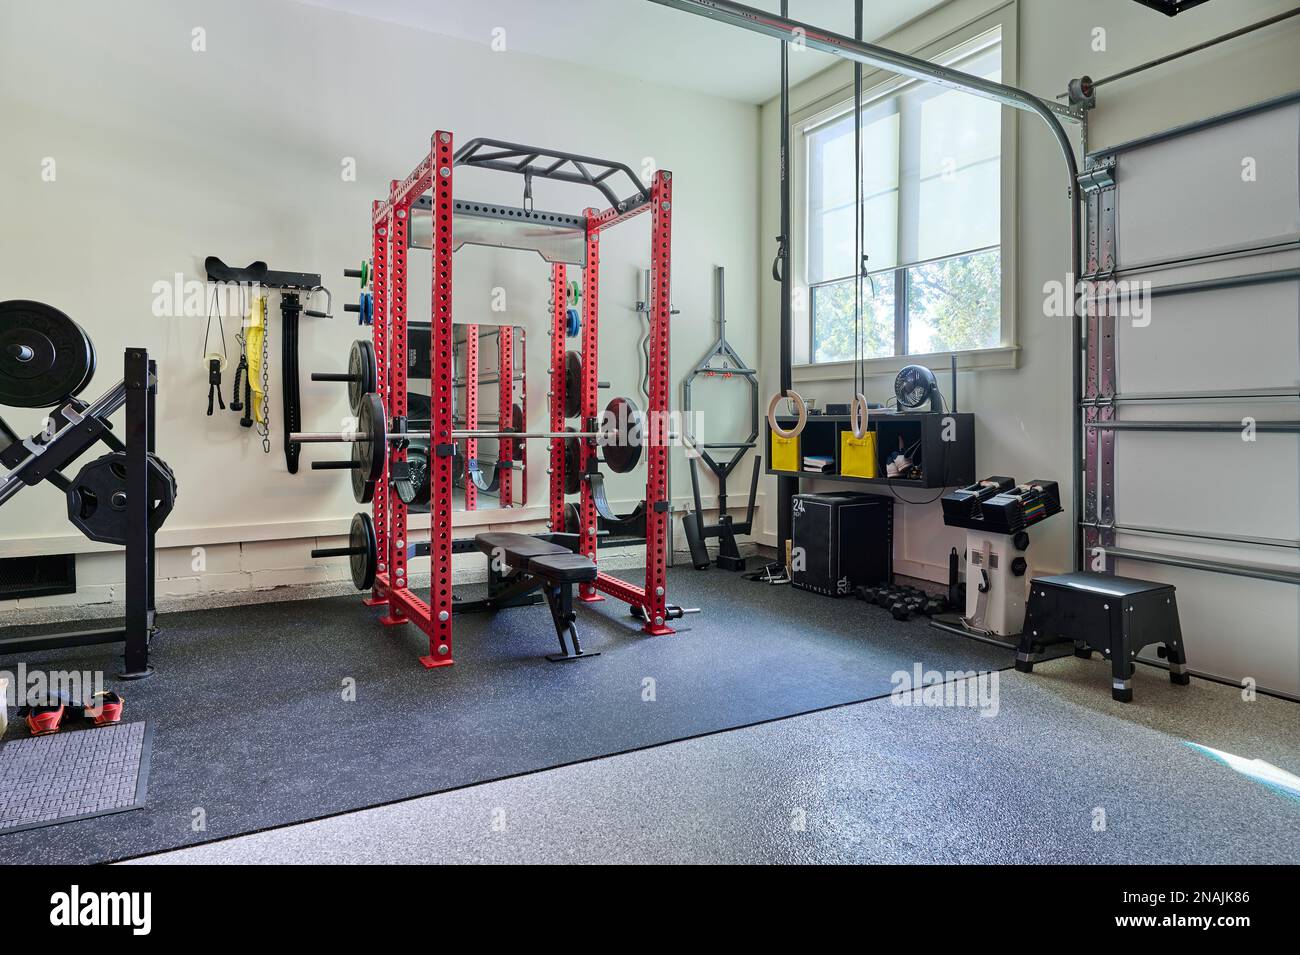 Squat Rack and Other Gym Equipment in Home Garage Gym for Weightlifting, Fitness, Exercise, Bodybuilding Stock Photo